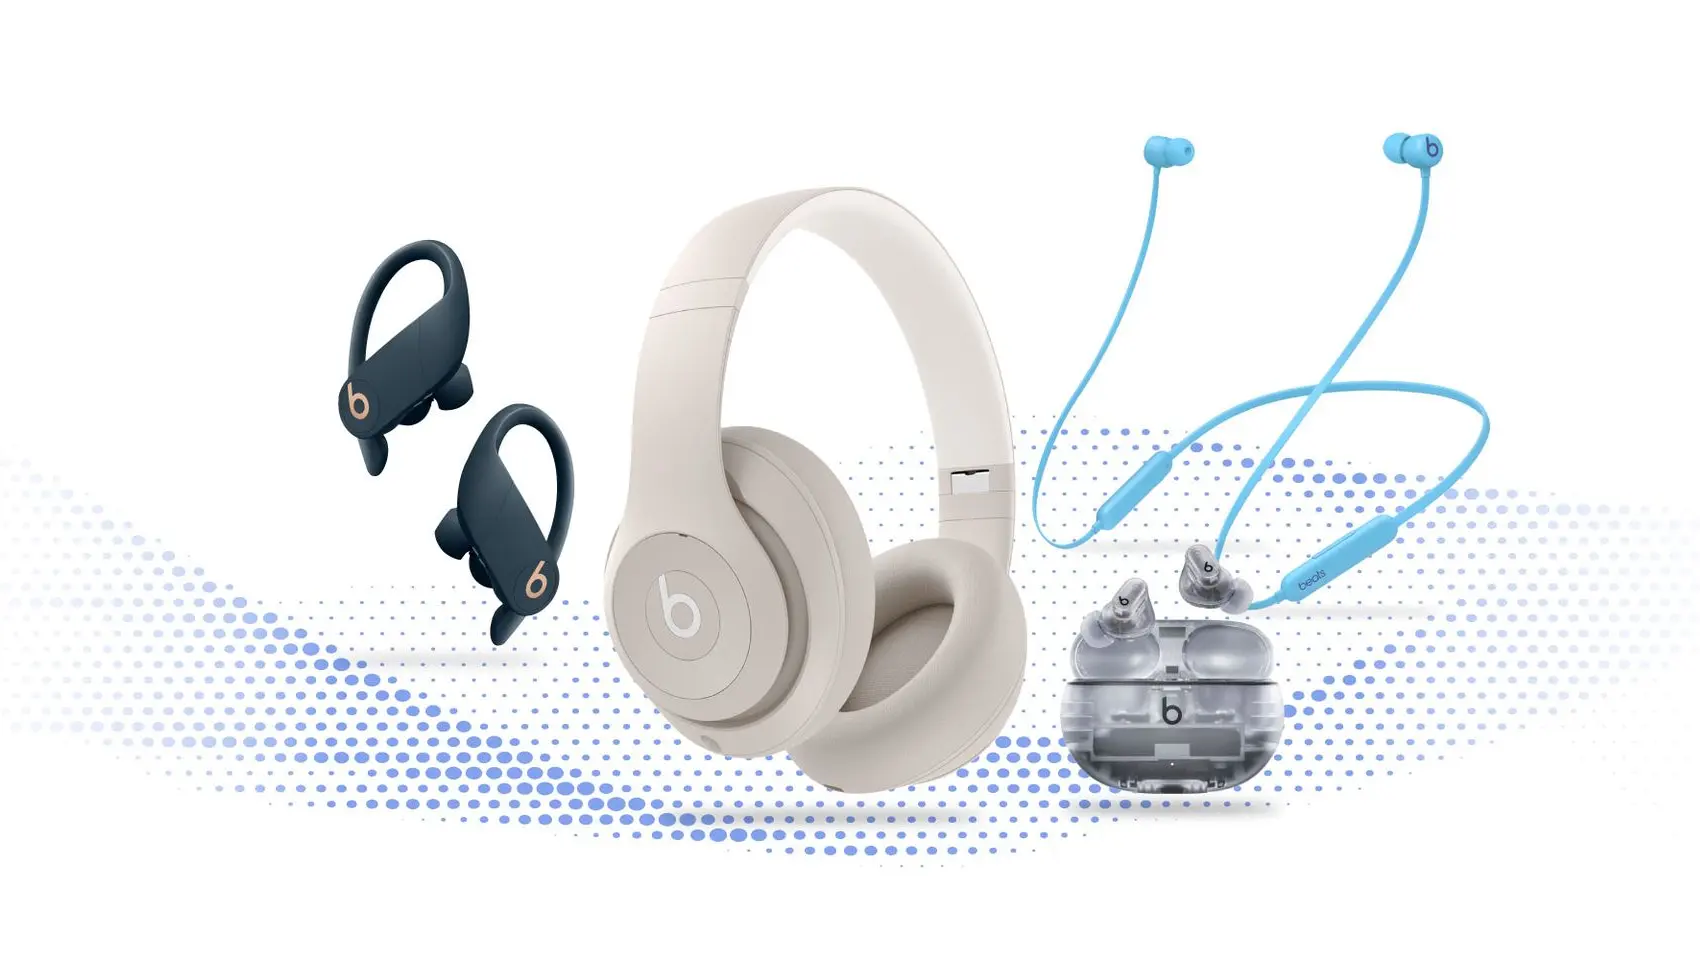 beats products